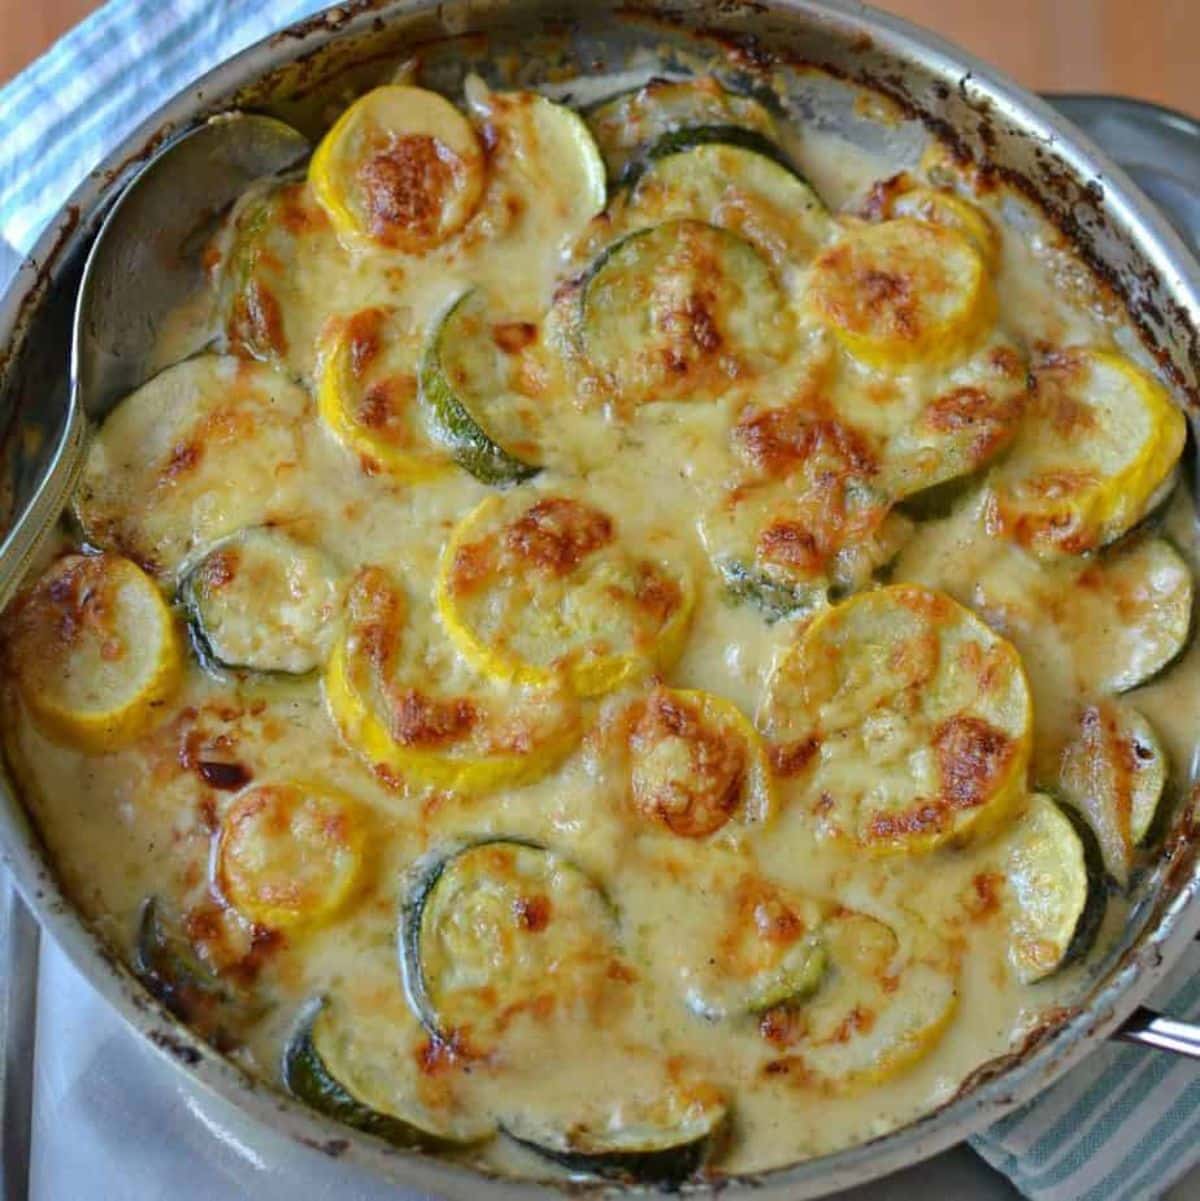 Zucchini gratin with yellow squash in a skillet.